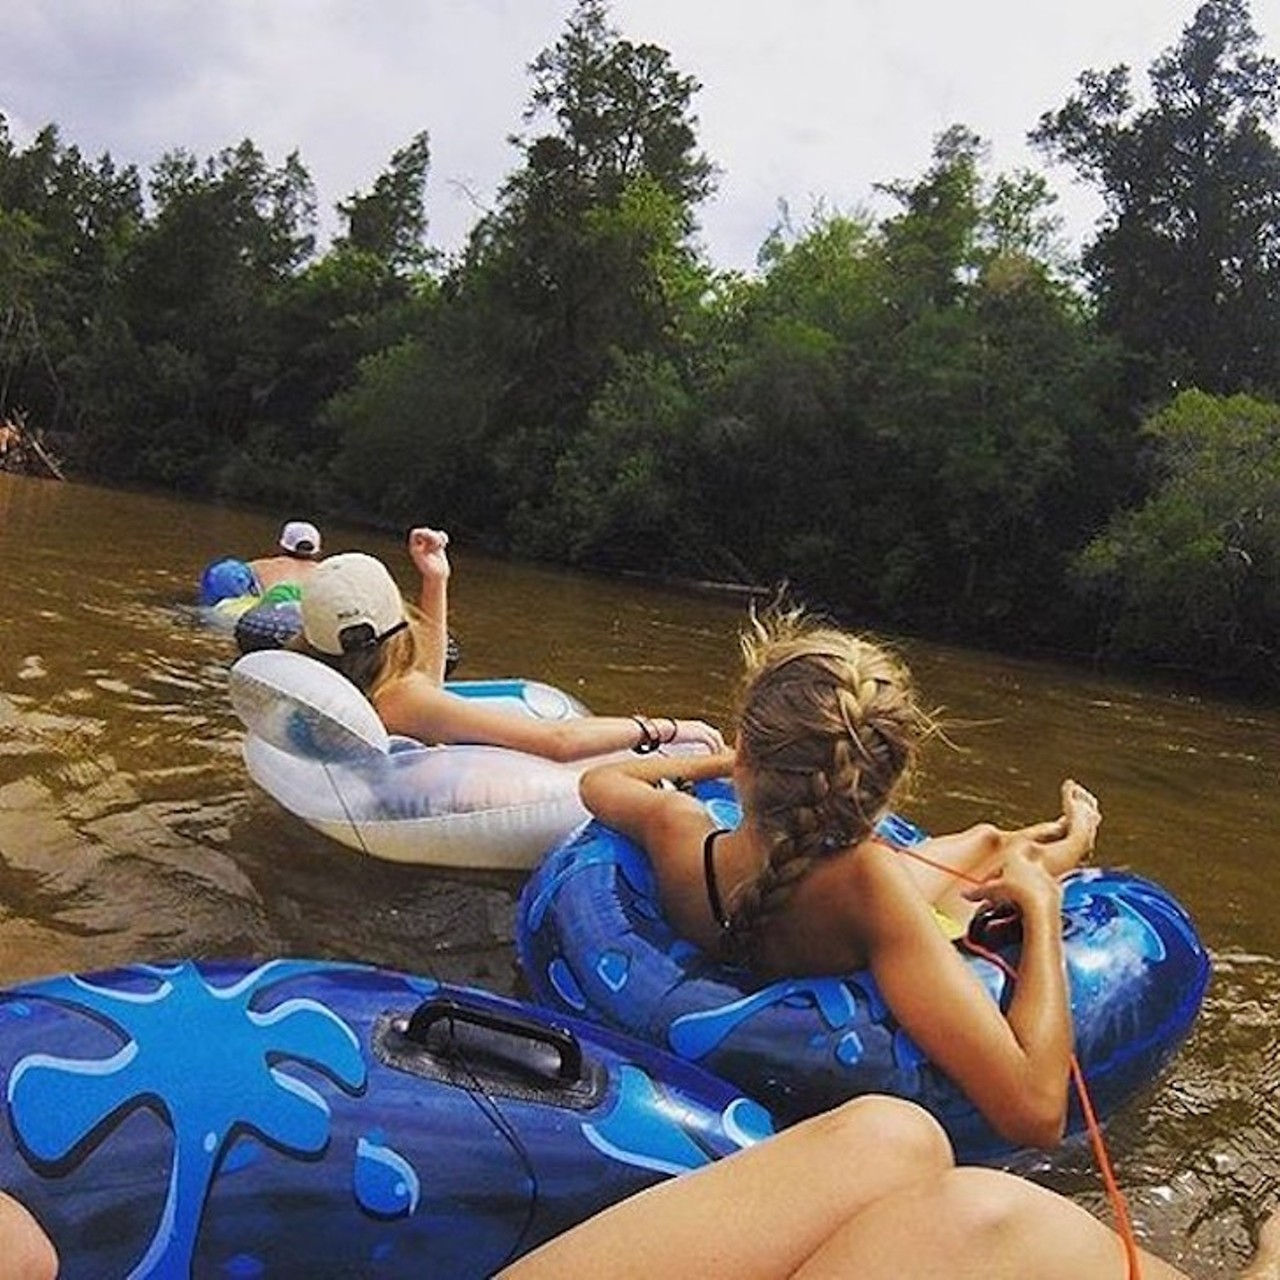 Coldwater Creek
8974 Tomahawk Landing Road, Milton, 850-623-6197
Distance: About 6 hours from Orlando
Photo via floridasplayground/Instagram